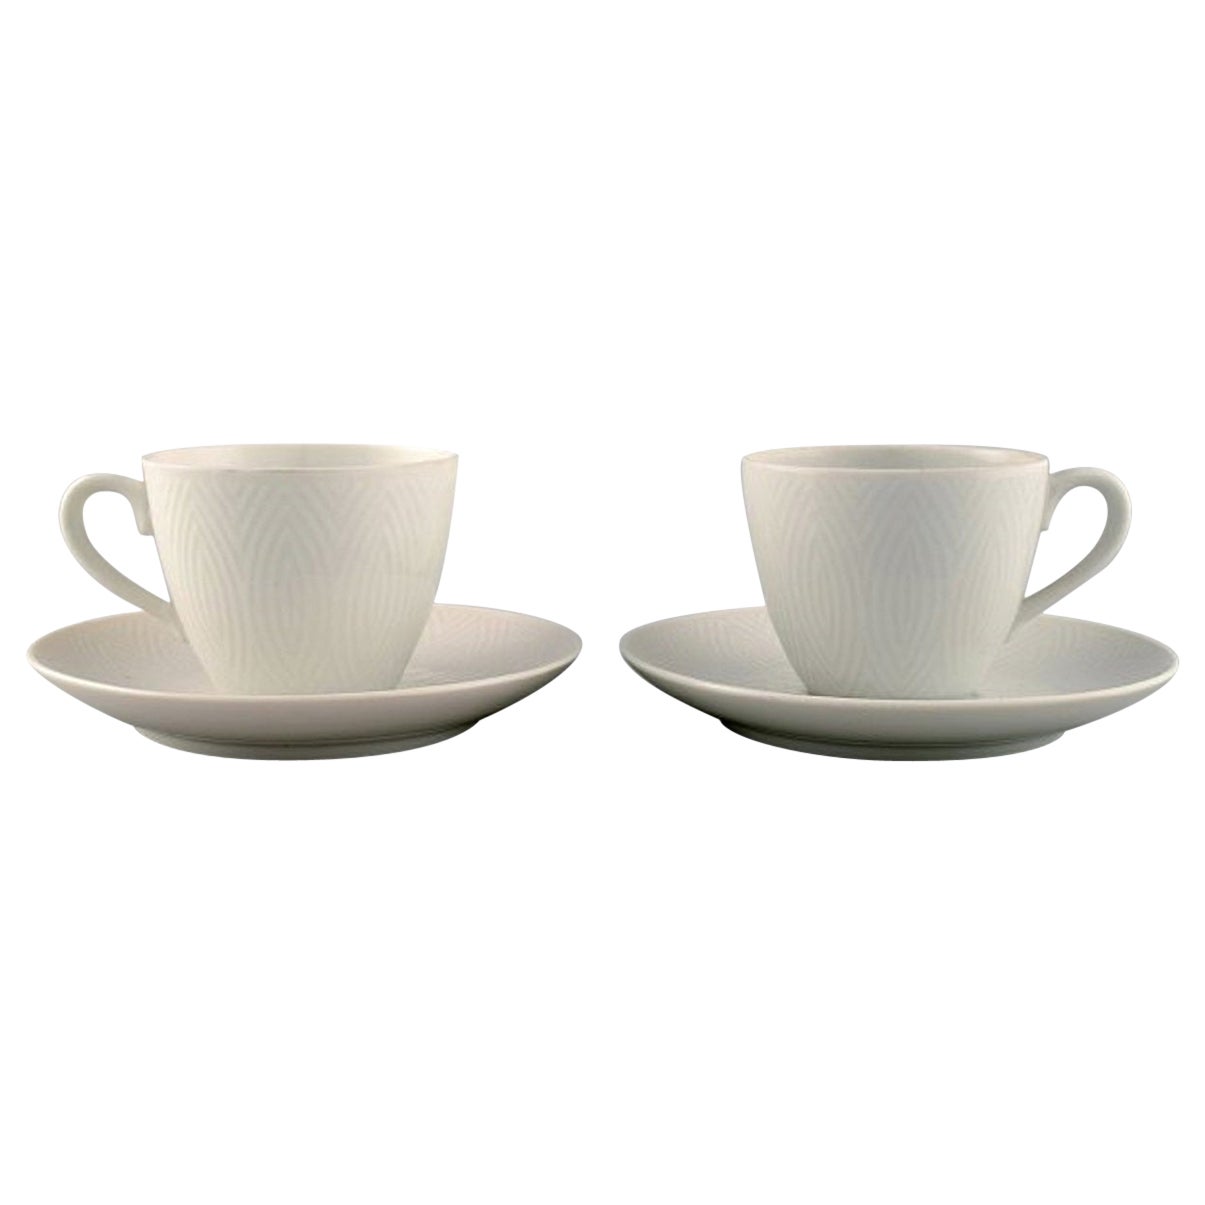 Royal Copenhagen, Salto Service, White, Two Coffee Cups with Saucers, 1960s